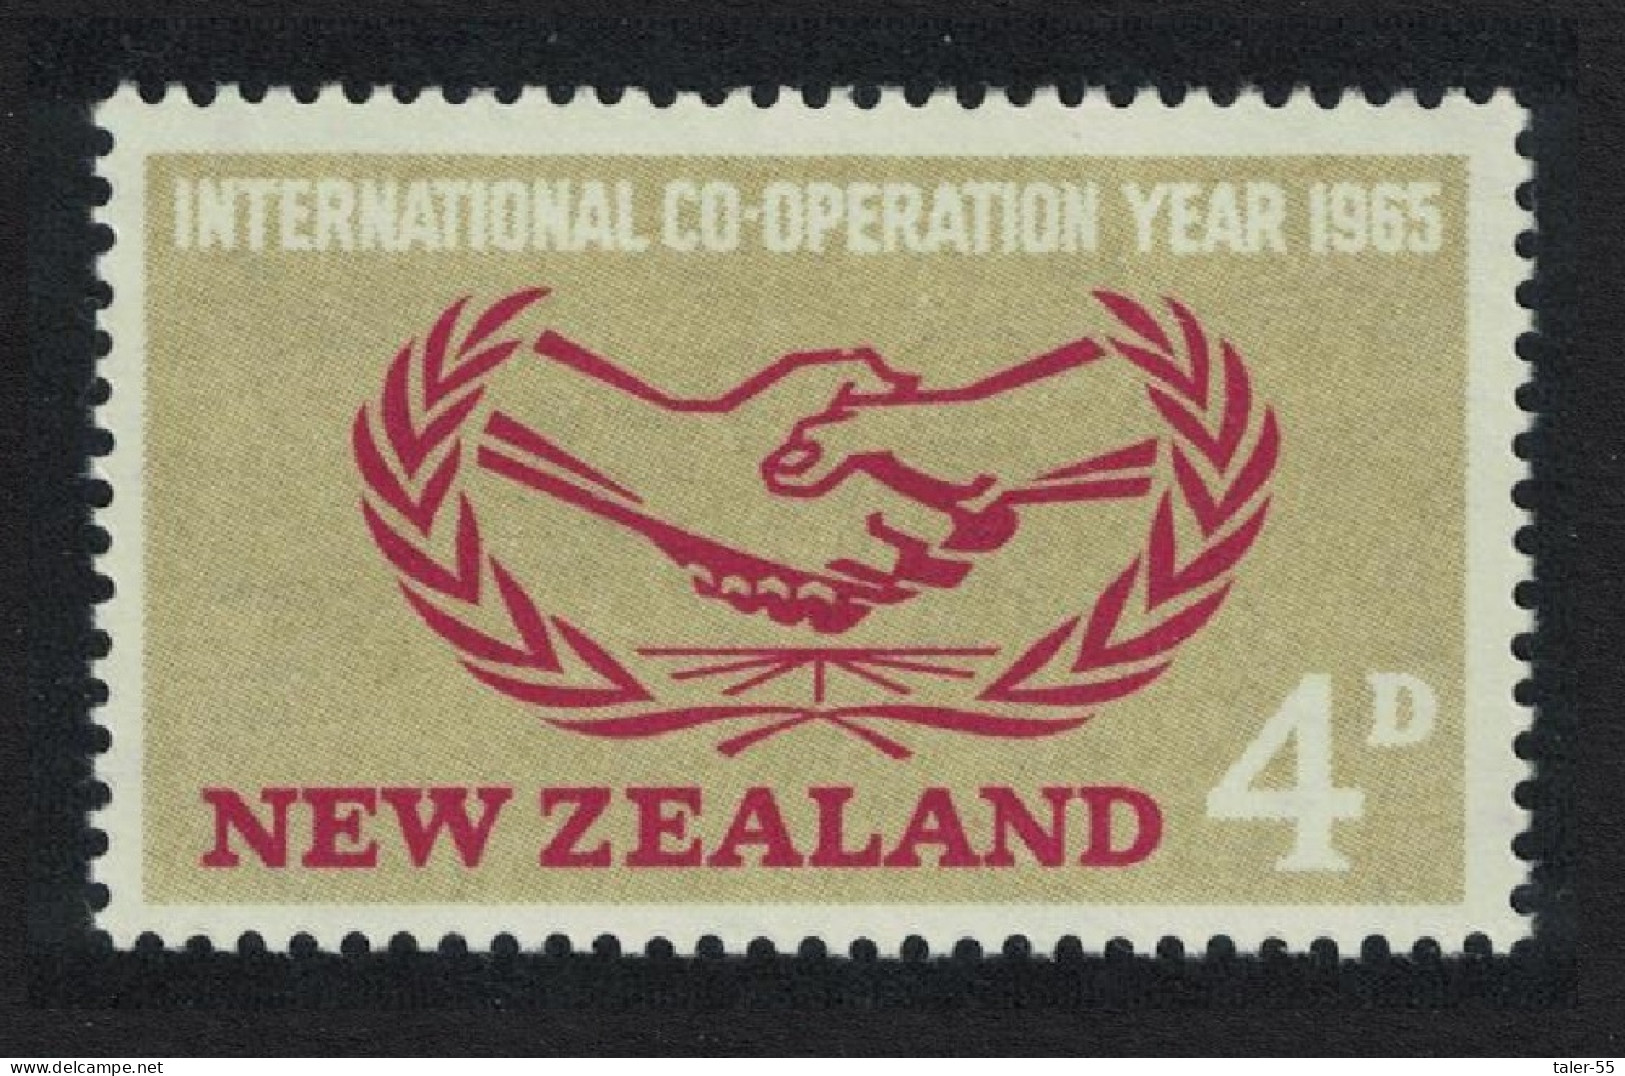 New Zealand International Co-operation Year 1965 MNH SG#833 - Unused Stamps